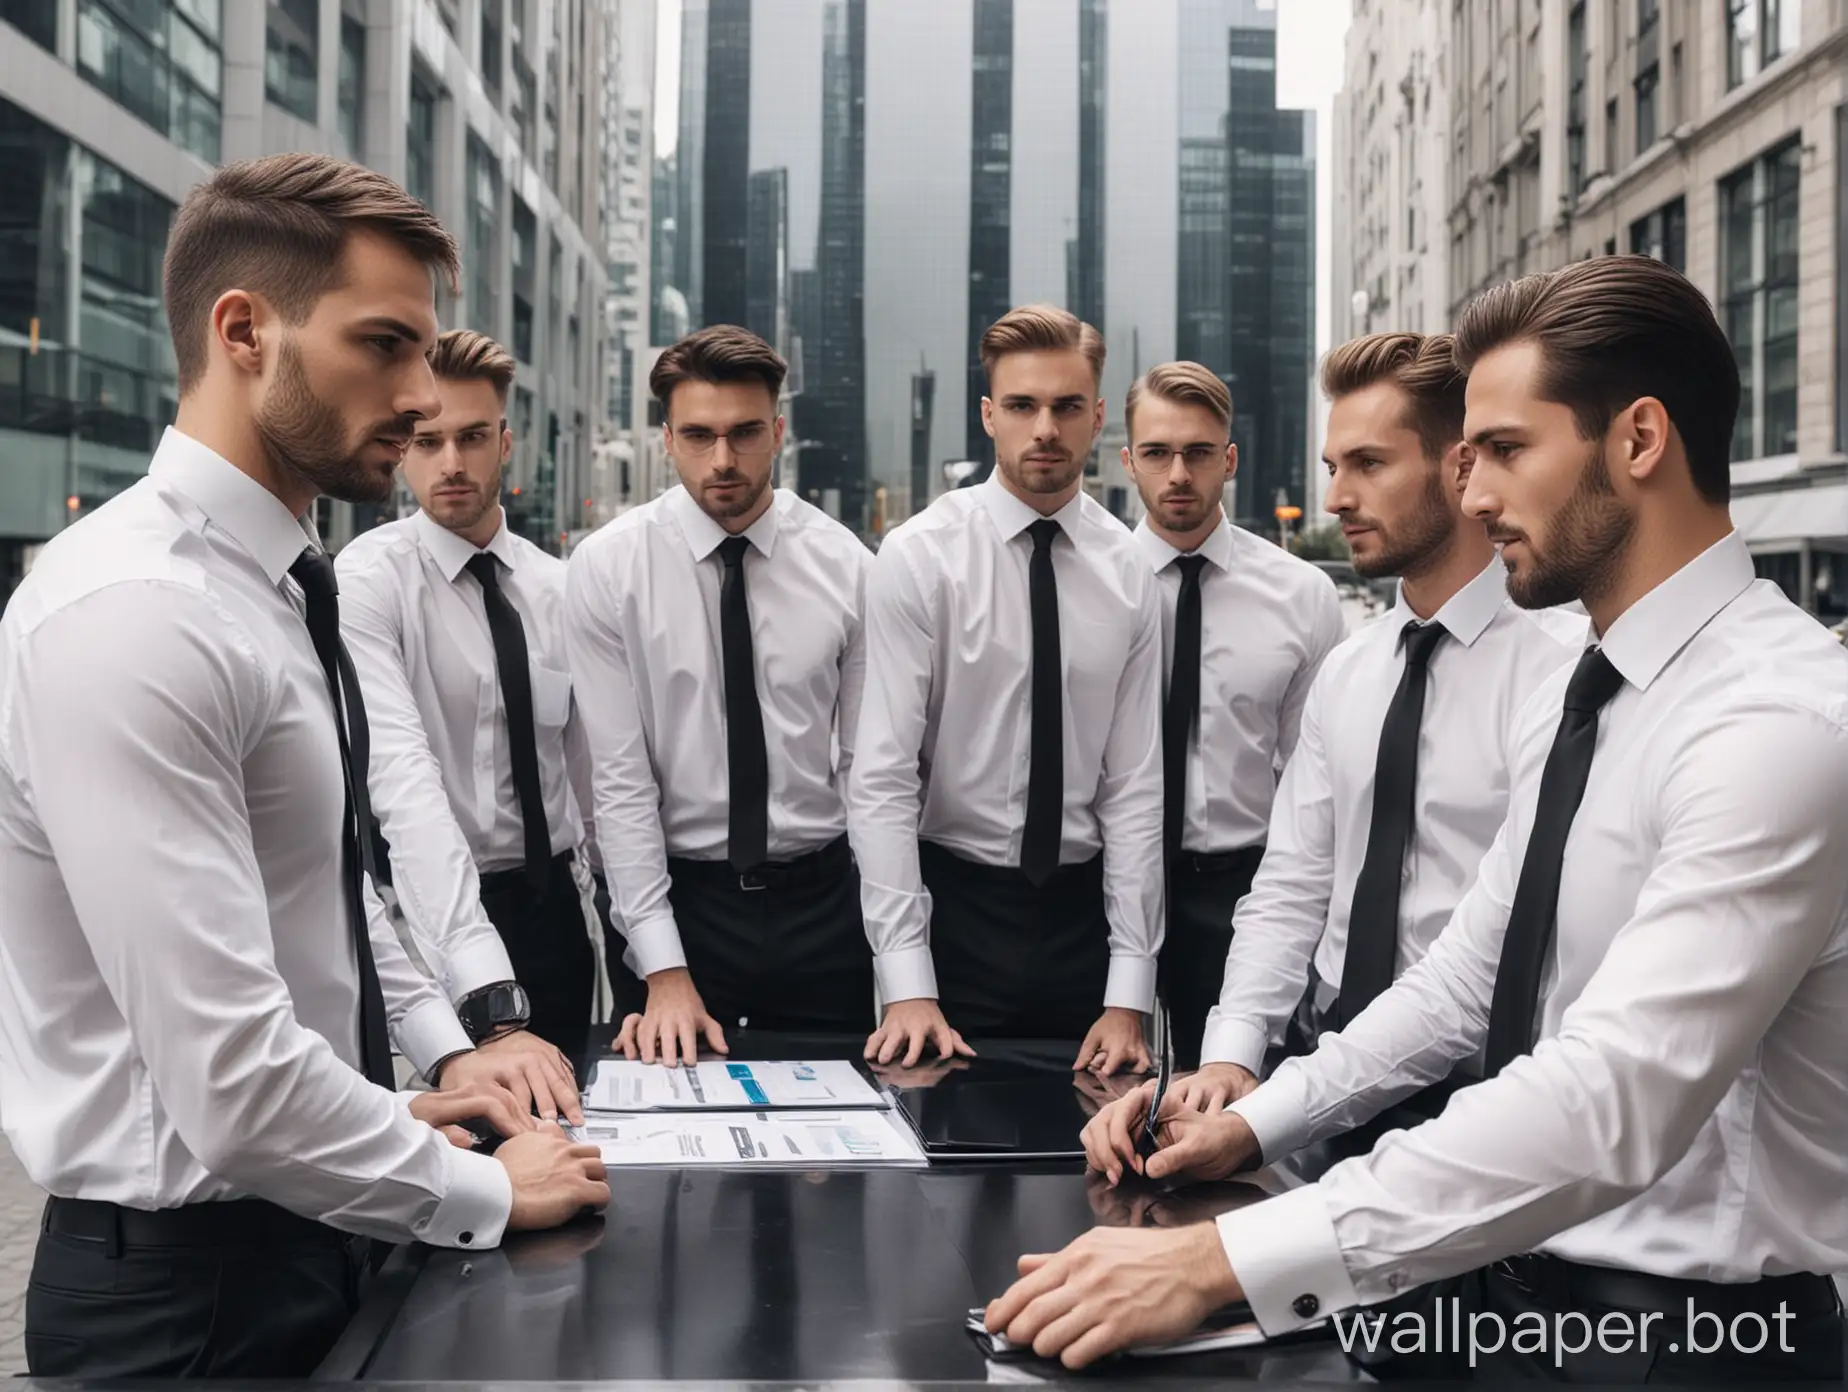 Futuristic-Business-Meeting-of-Men-in-White-Shirts-and-Black-Ties-in-Urban-Setting